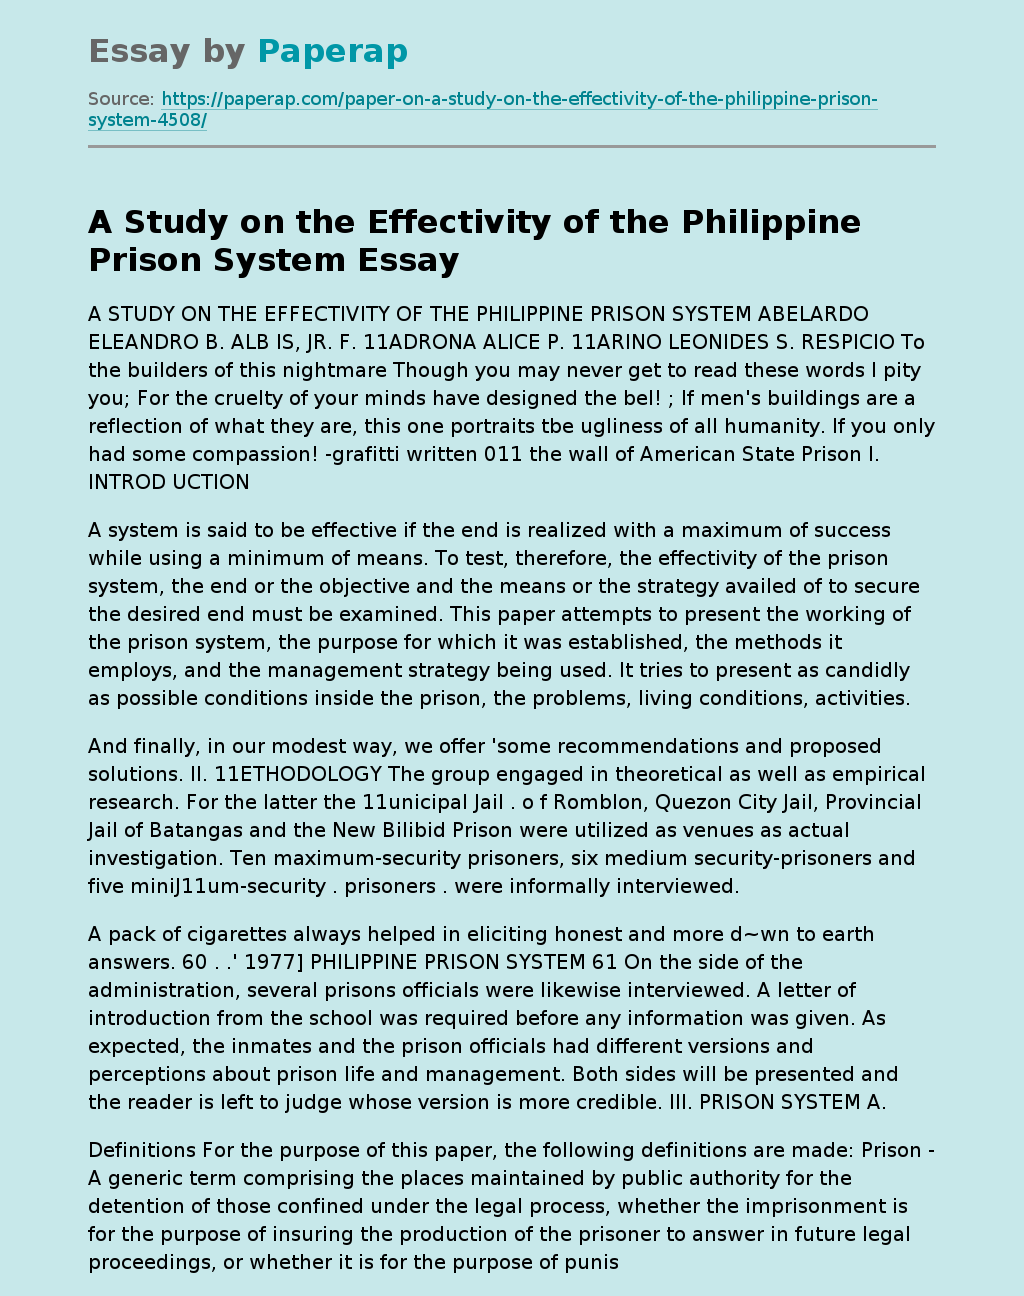 A Study on the Effectivity of the Philippine Prison System